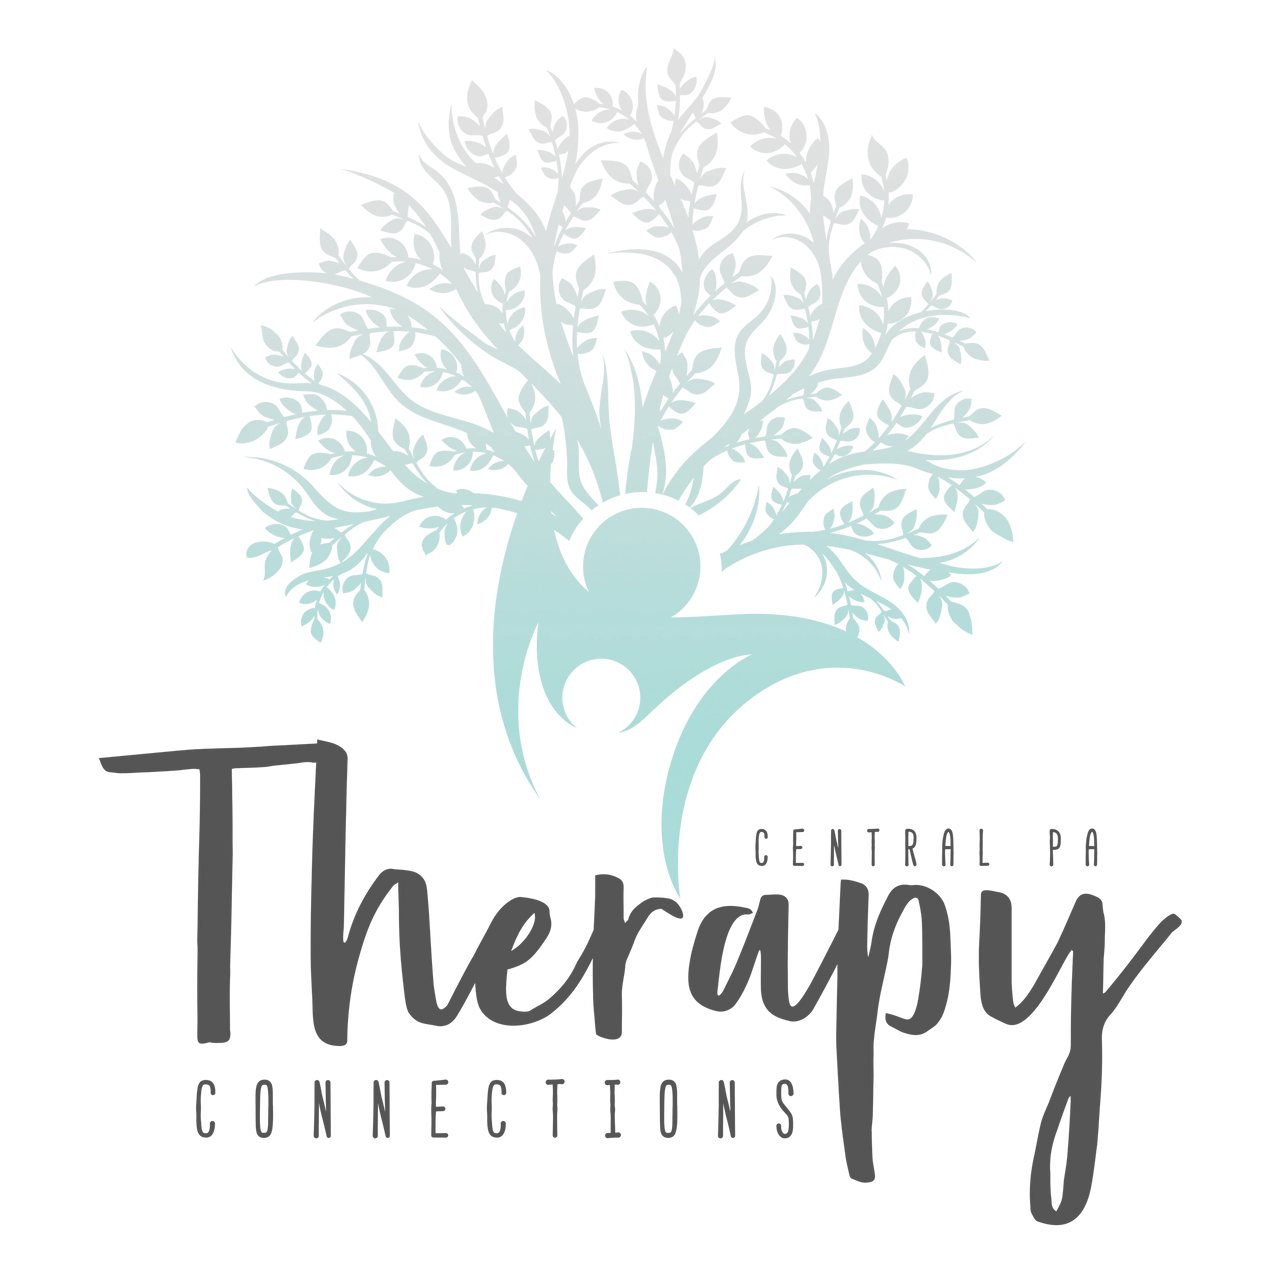 Central Pa Therapy Connections - Hummelstown, PA 17036 - (717)449-4854 | ShowMeLocal.com